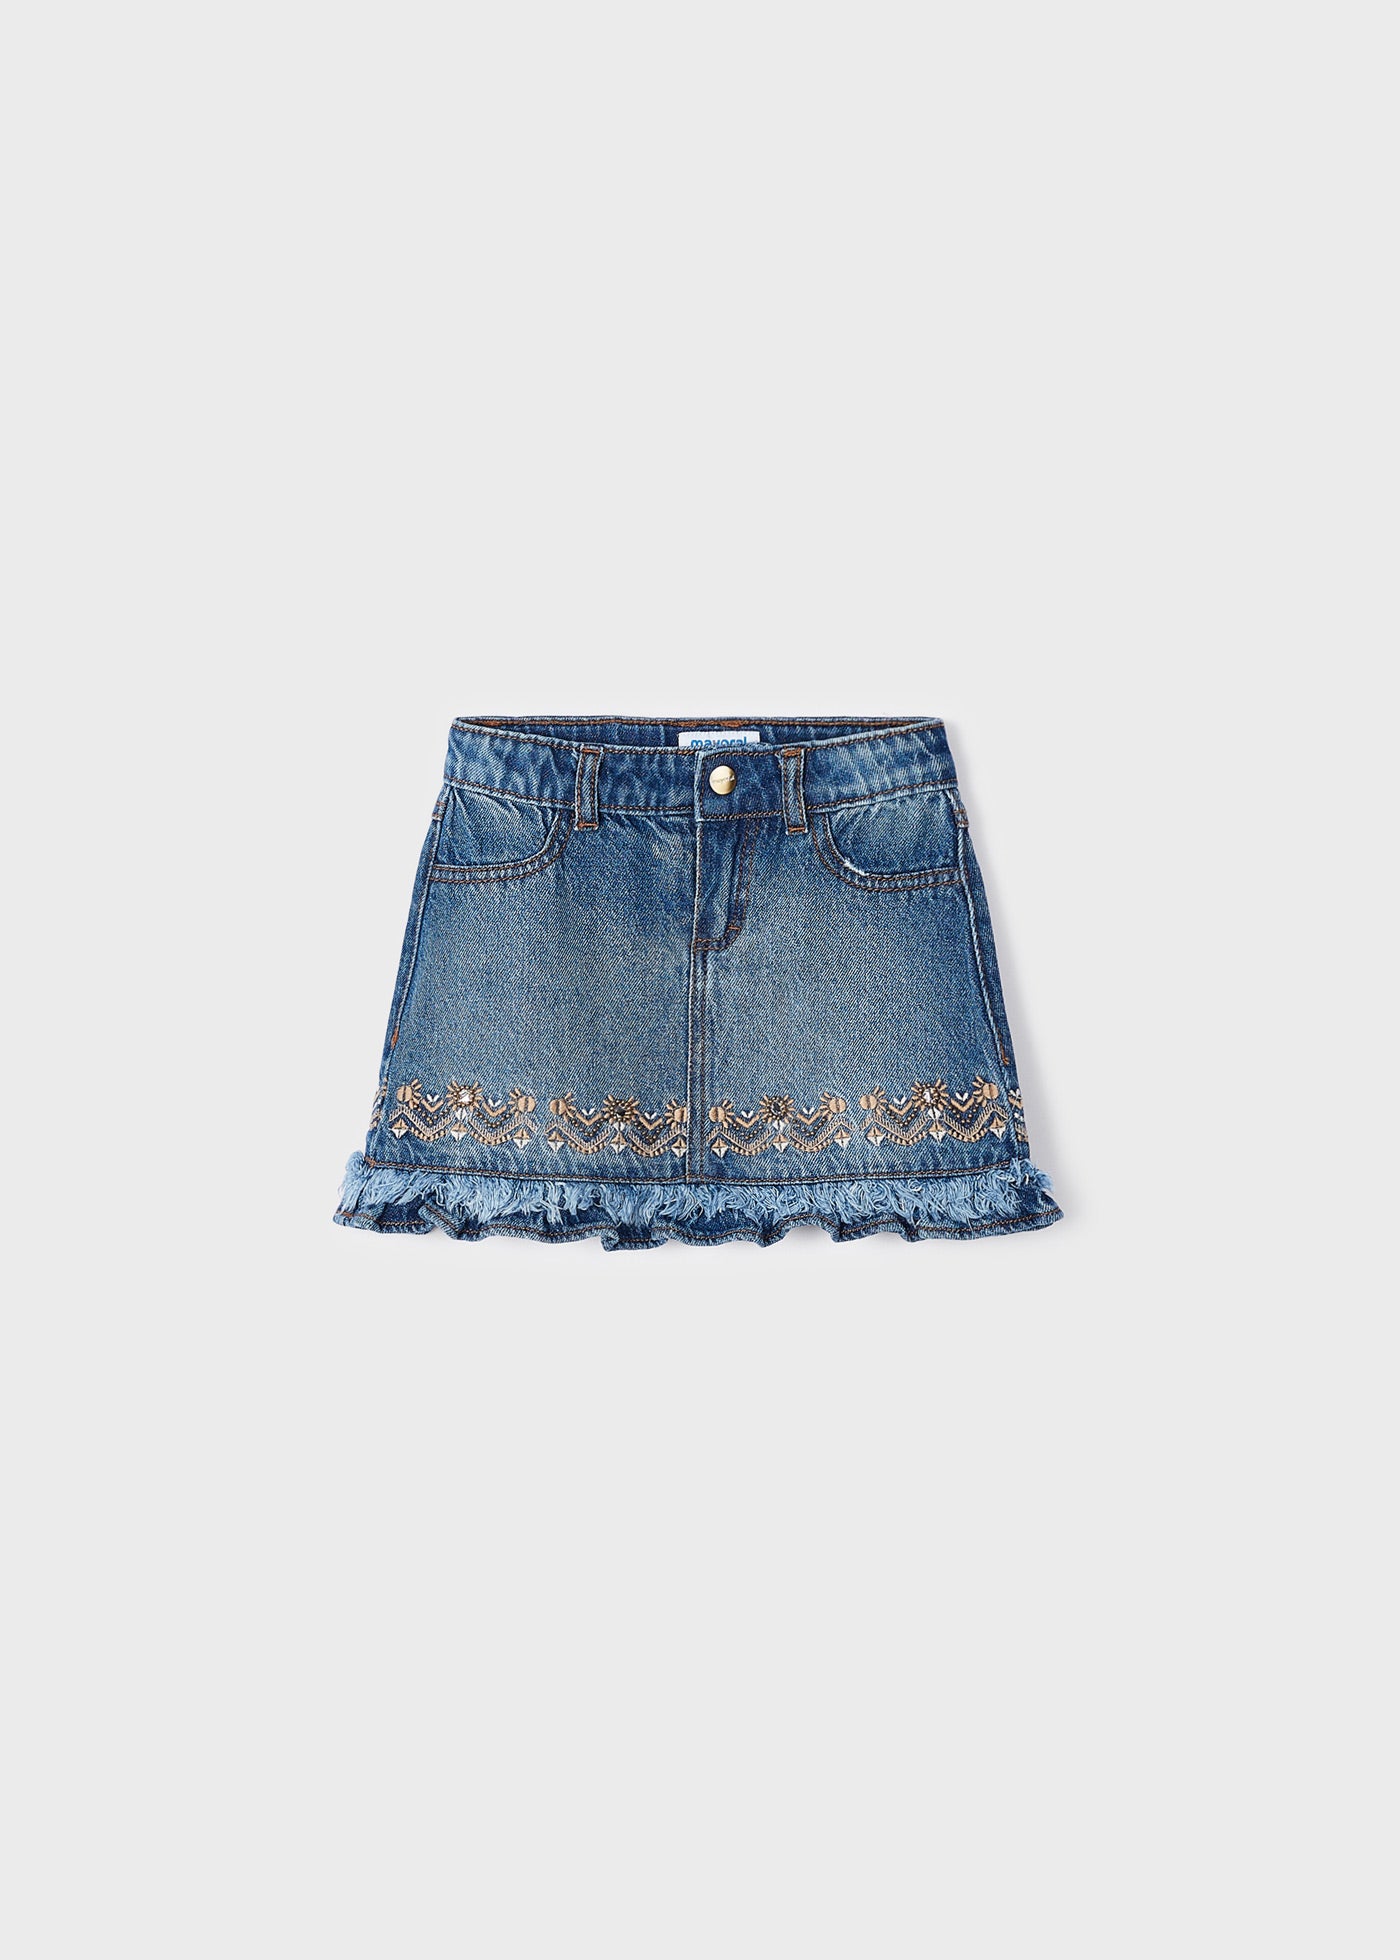 Mayoral Mini Demin Skirt w/Embroidery _Blue 3904-67